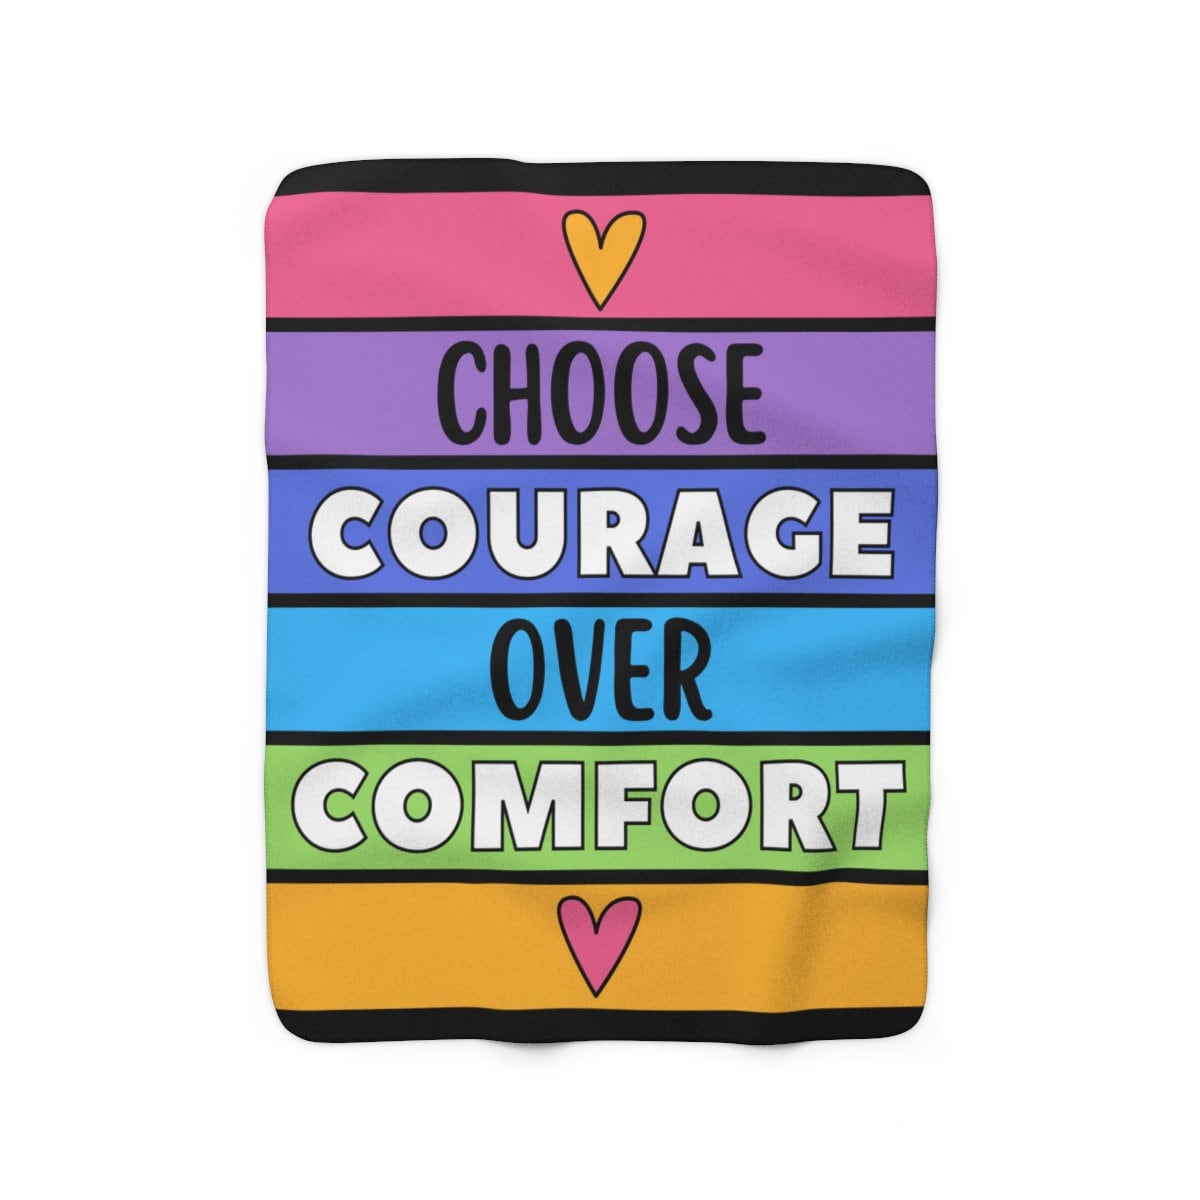 Choose Courage Over Comfort Fleece Blanket, Inspirational Quote Blanket Gifts, Cozy and Warm Throw Blankets For Friends, Courageous Gifts